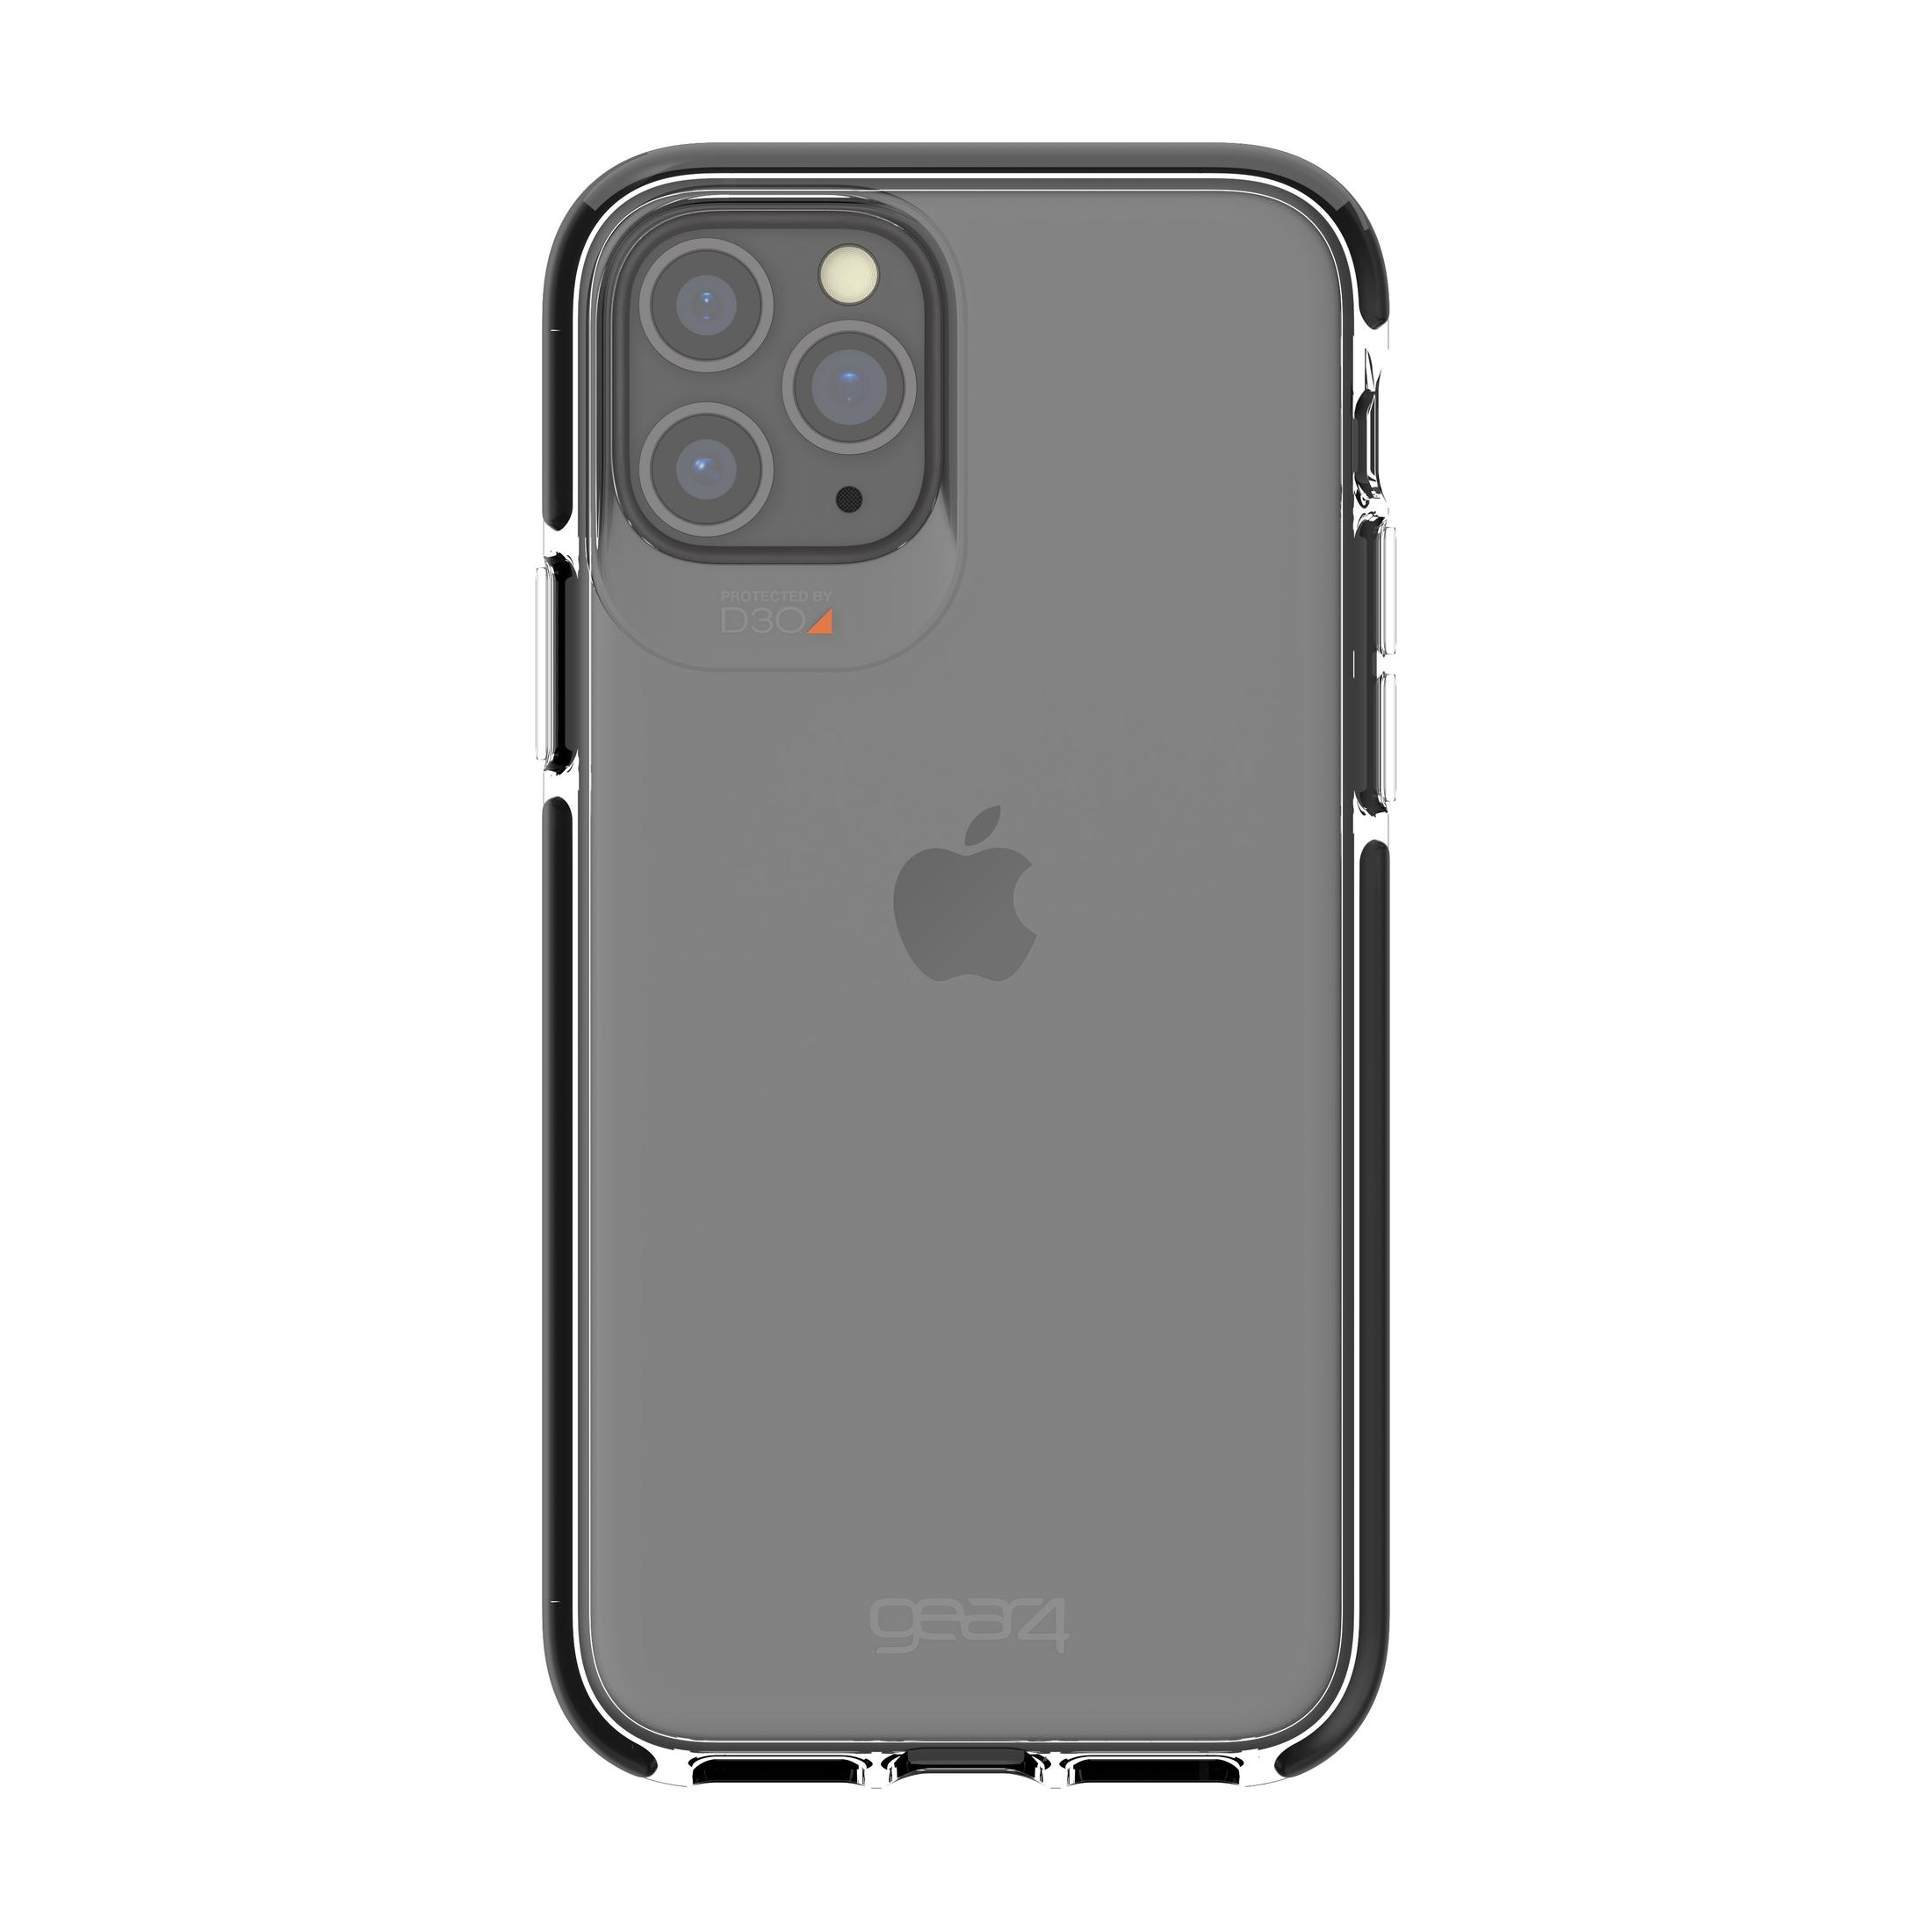 Pro, (BLACK), Schwarz 11 Apple, iPhone PRO 11 Backcover, PICCADILLY 0S32919 GEAR4 IPHONE